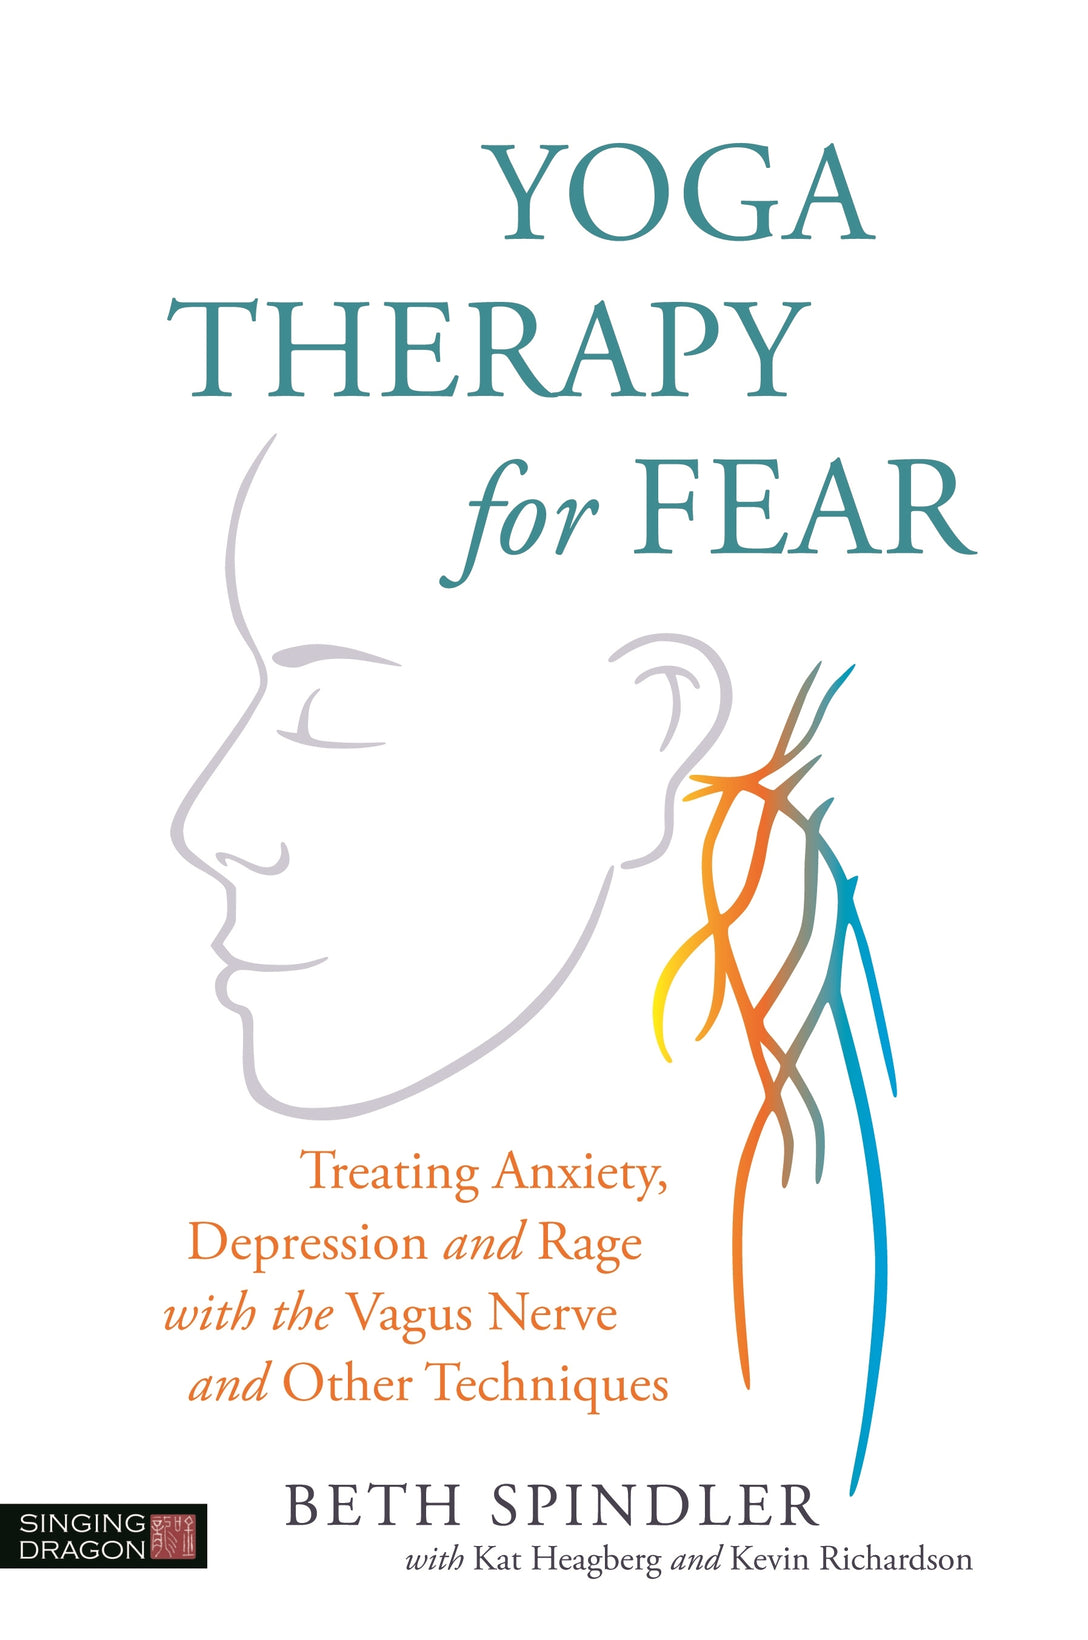 Yoga Therapy for Fear by Beth Spindler